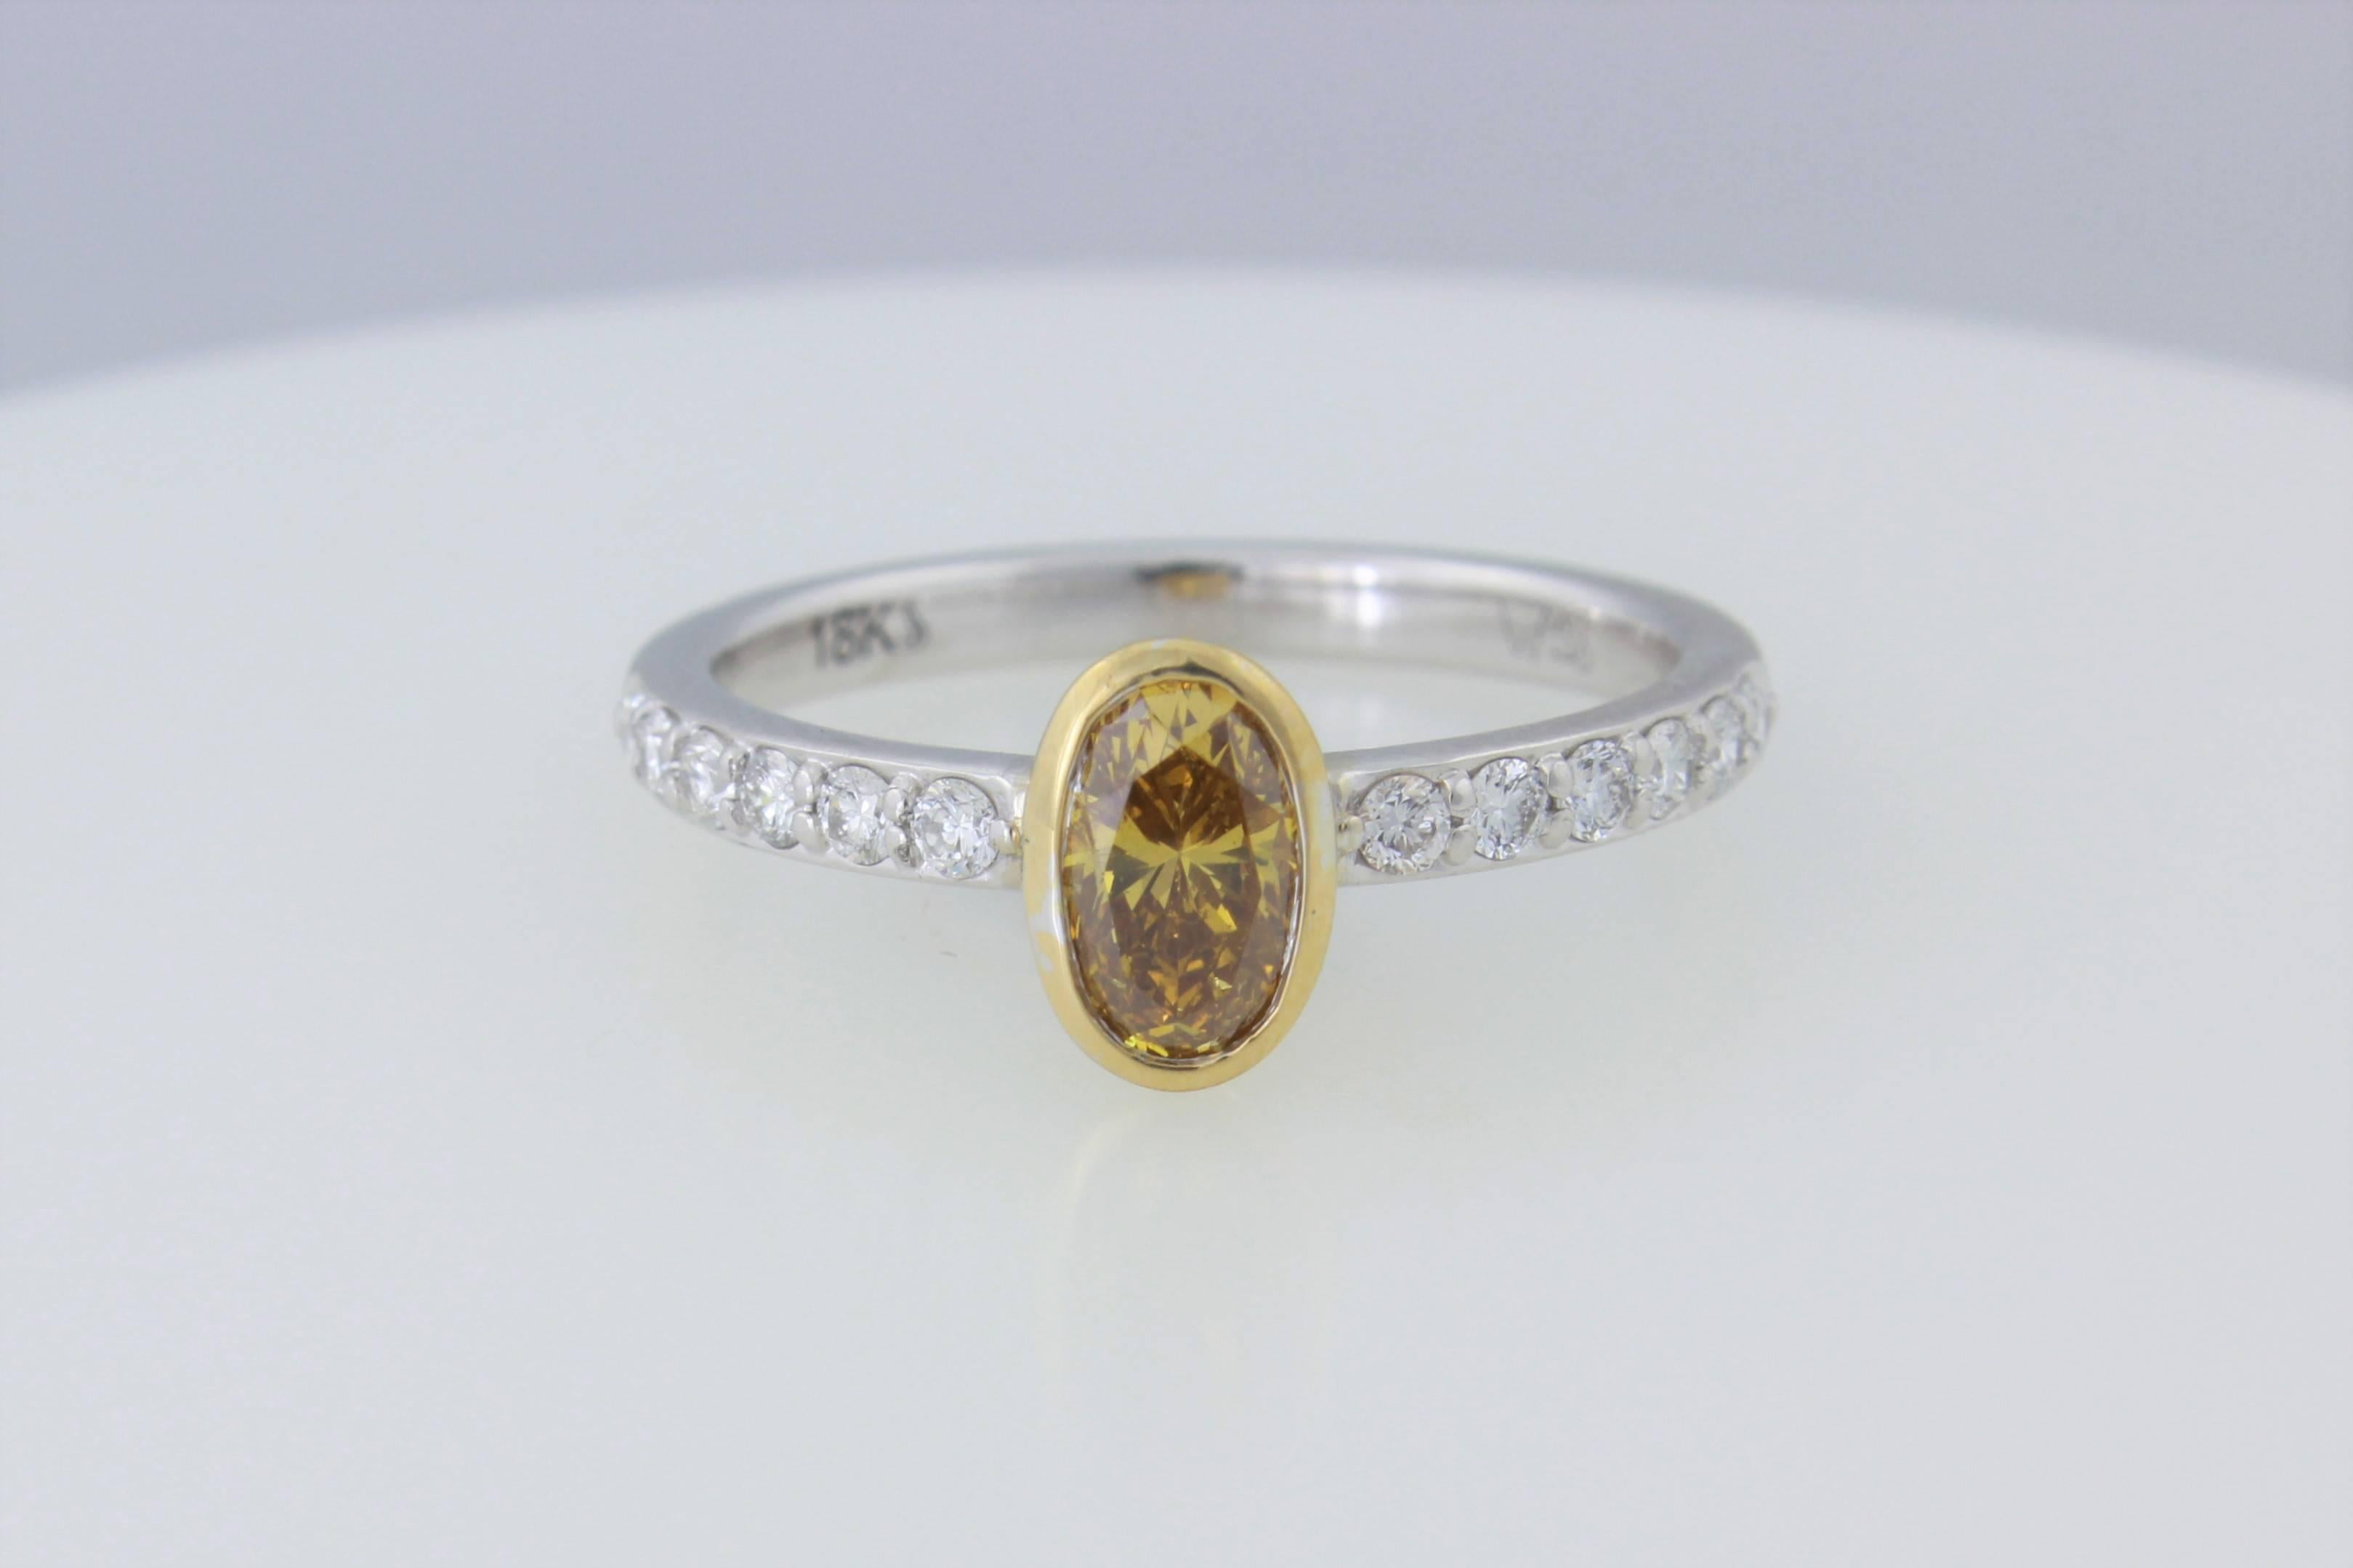 GIA Certified .56 ct Orange Yellow Oval Diamond In 18kt Two Tone Diamond Ring  In New Condition For Sale In Walnut Creek, CA